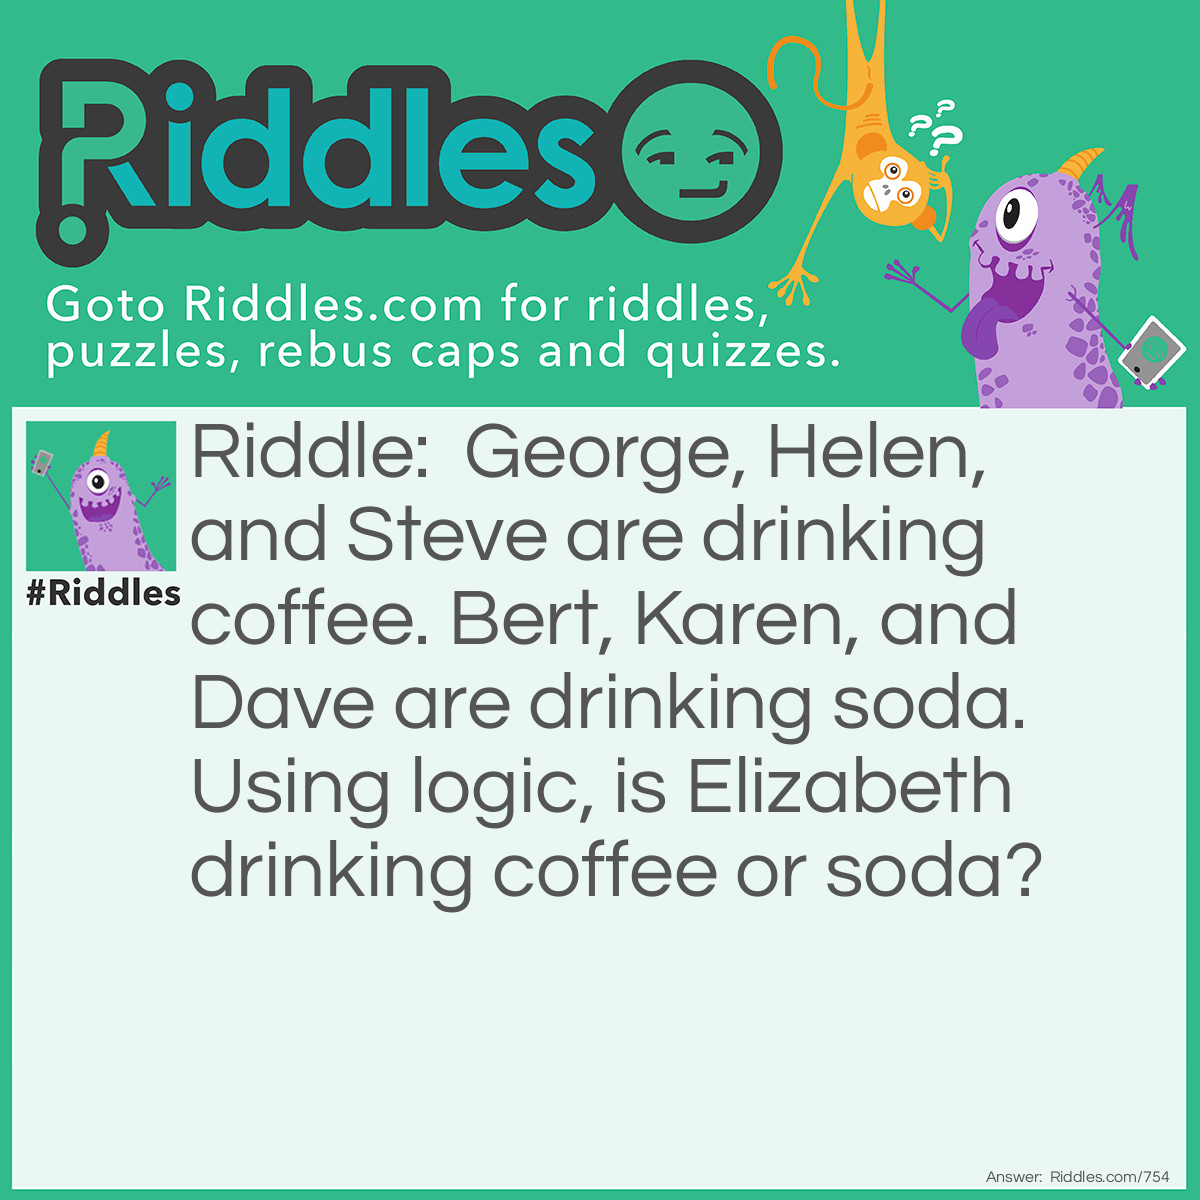 Riddle: George, Helen, and Steve are drinking coffee. Bert, Karen, and Dave are drinking soda. Using logic, is Elizabeth drinking coffee or soda? Answer: Elizabeth is drinking coffee. The letter E appears twice in her name, as it does in the names of the others that are drinking coffee.